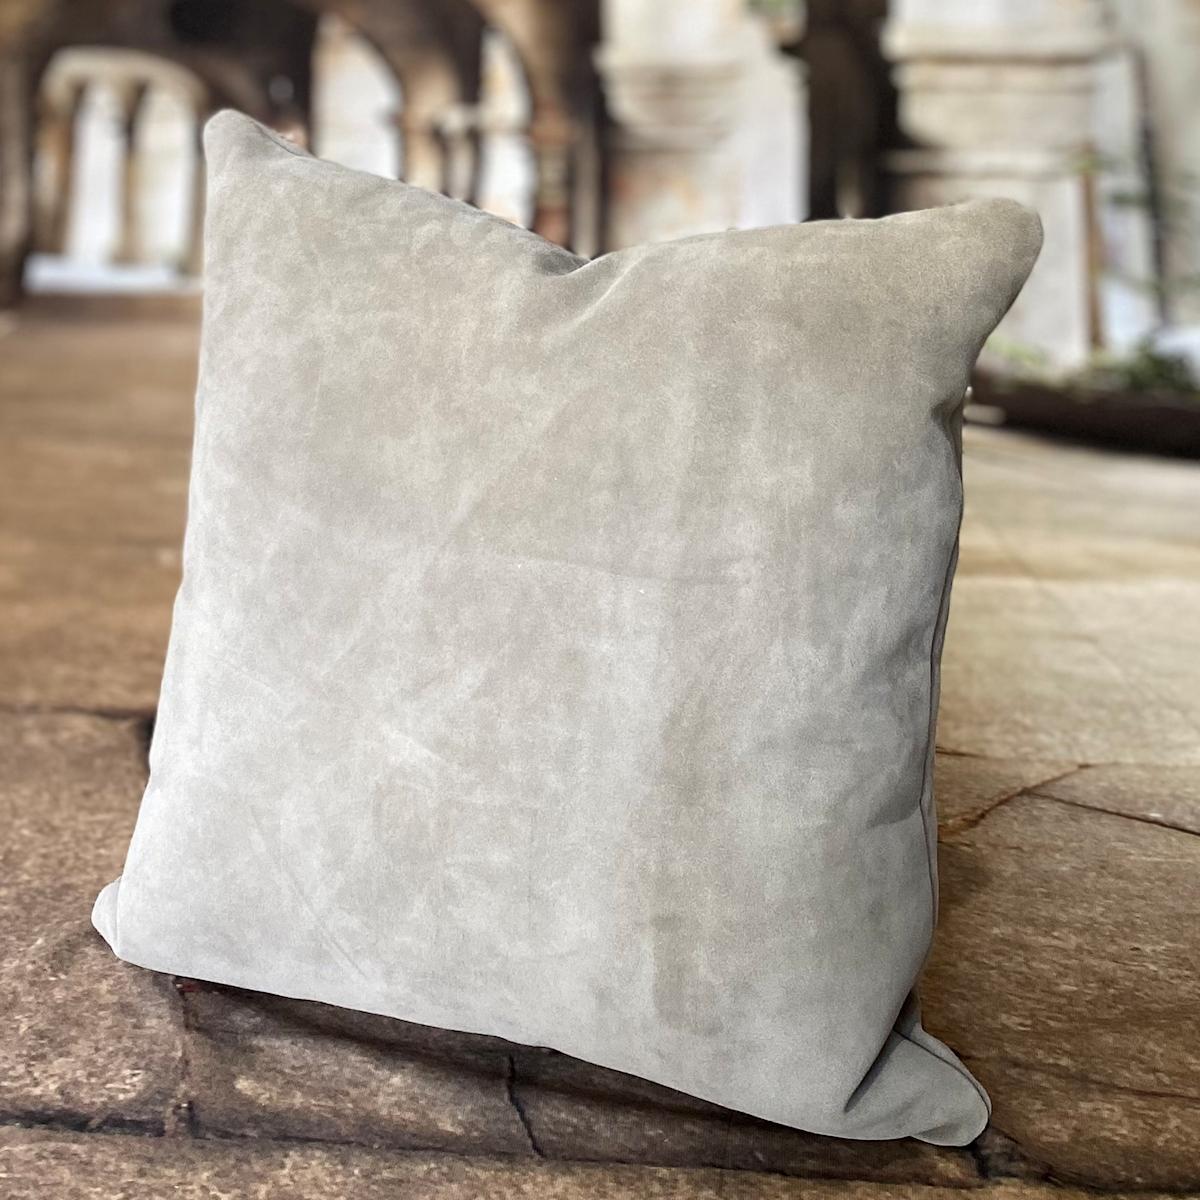 

Introducing a collection of Spanish leather suede pillows, individually handcrafted in Australia, by eluxury homes' leather artisans.
Each grey leather pillow comes with a full leather panel front and back with a decorative metal back zipper. To